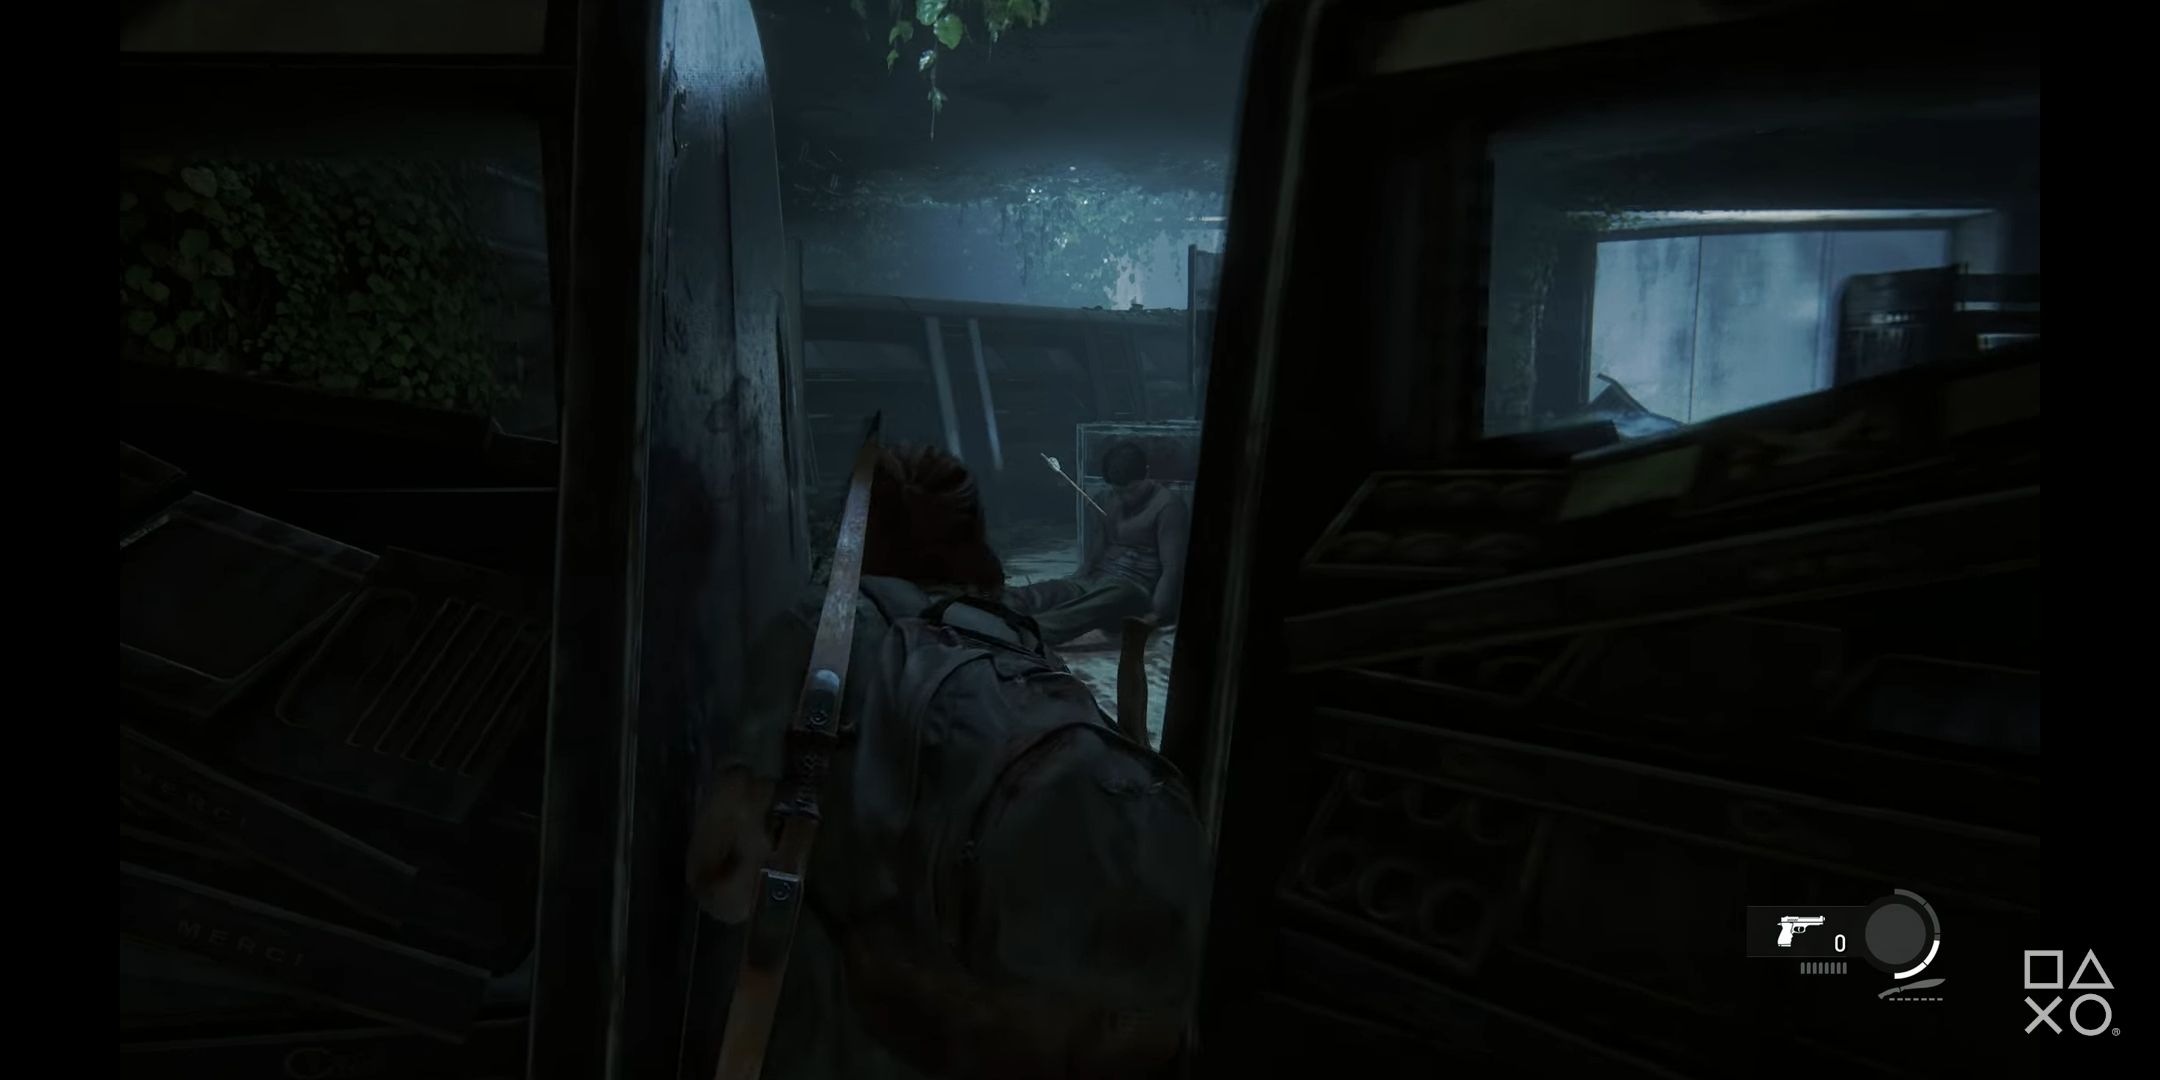 Ellie traversal in The Last of Us 2 squeezing through in gameplay trailer/demo